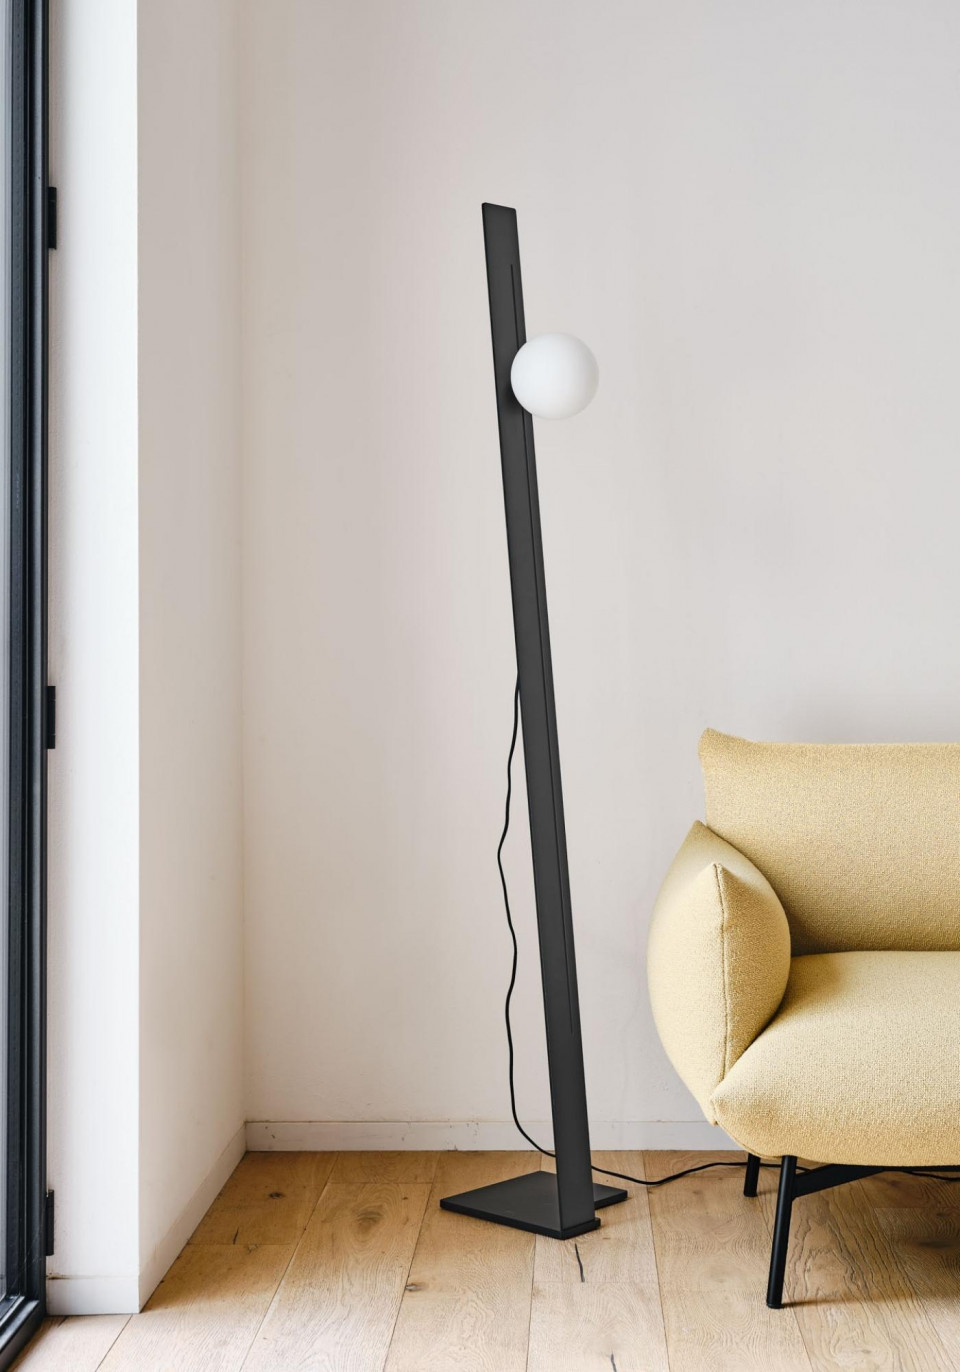 Suspense lamp collection by MIDJ